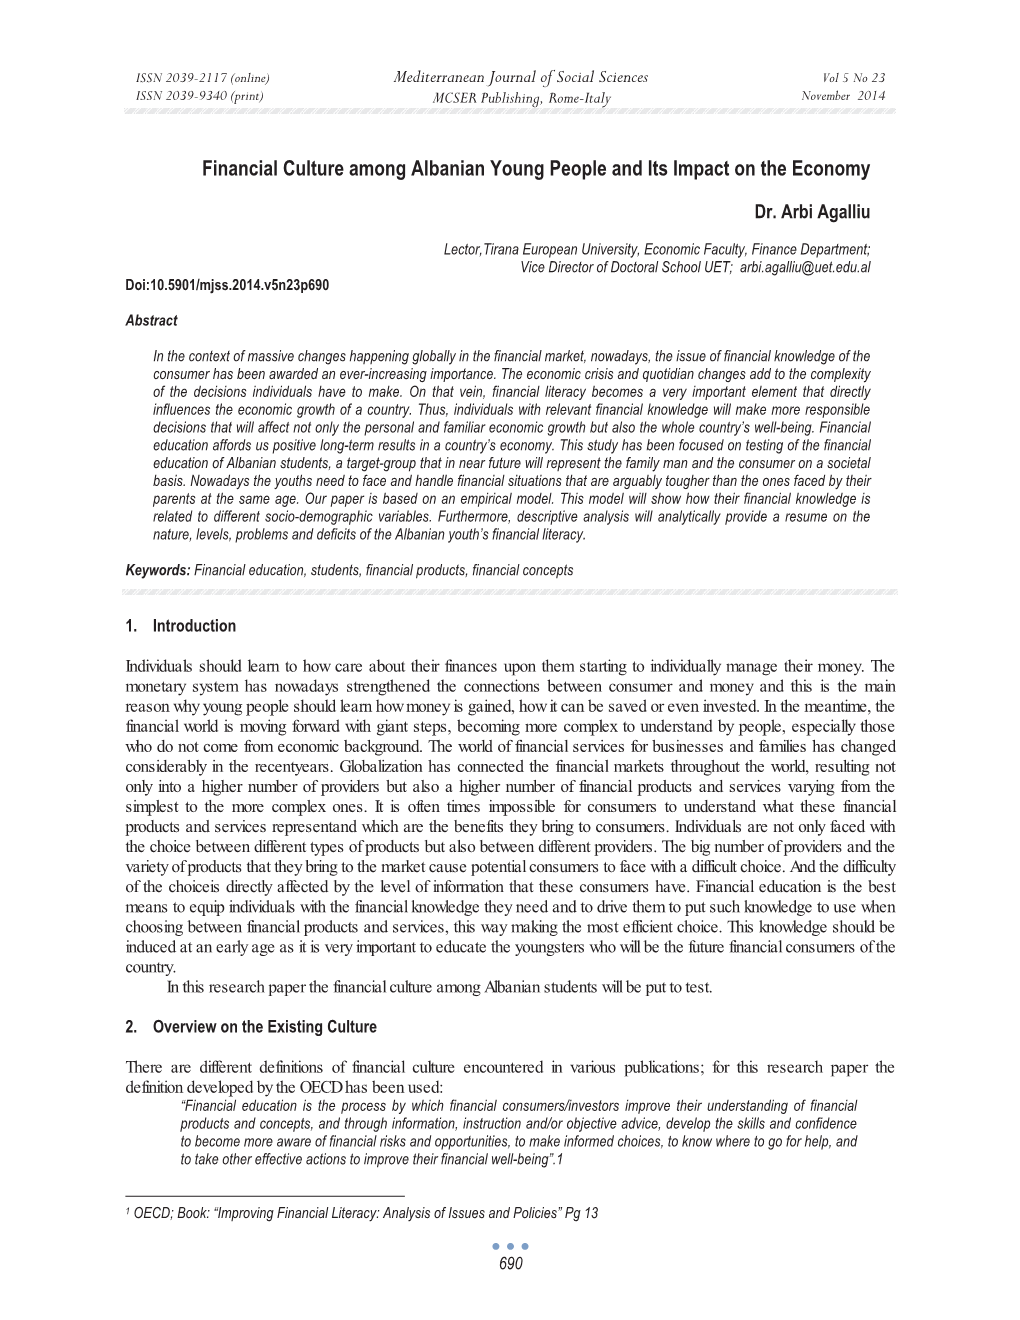 Financial Culture Among Albanian Young People and Its Impact on the Economy